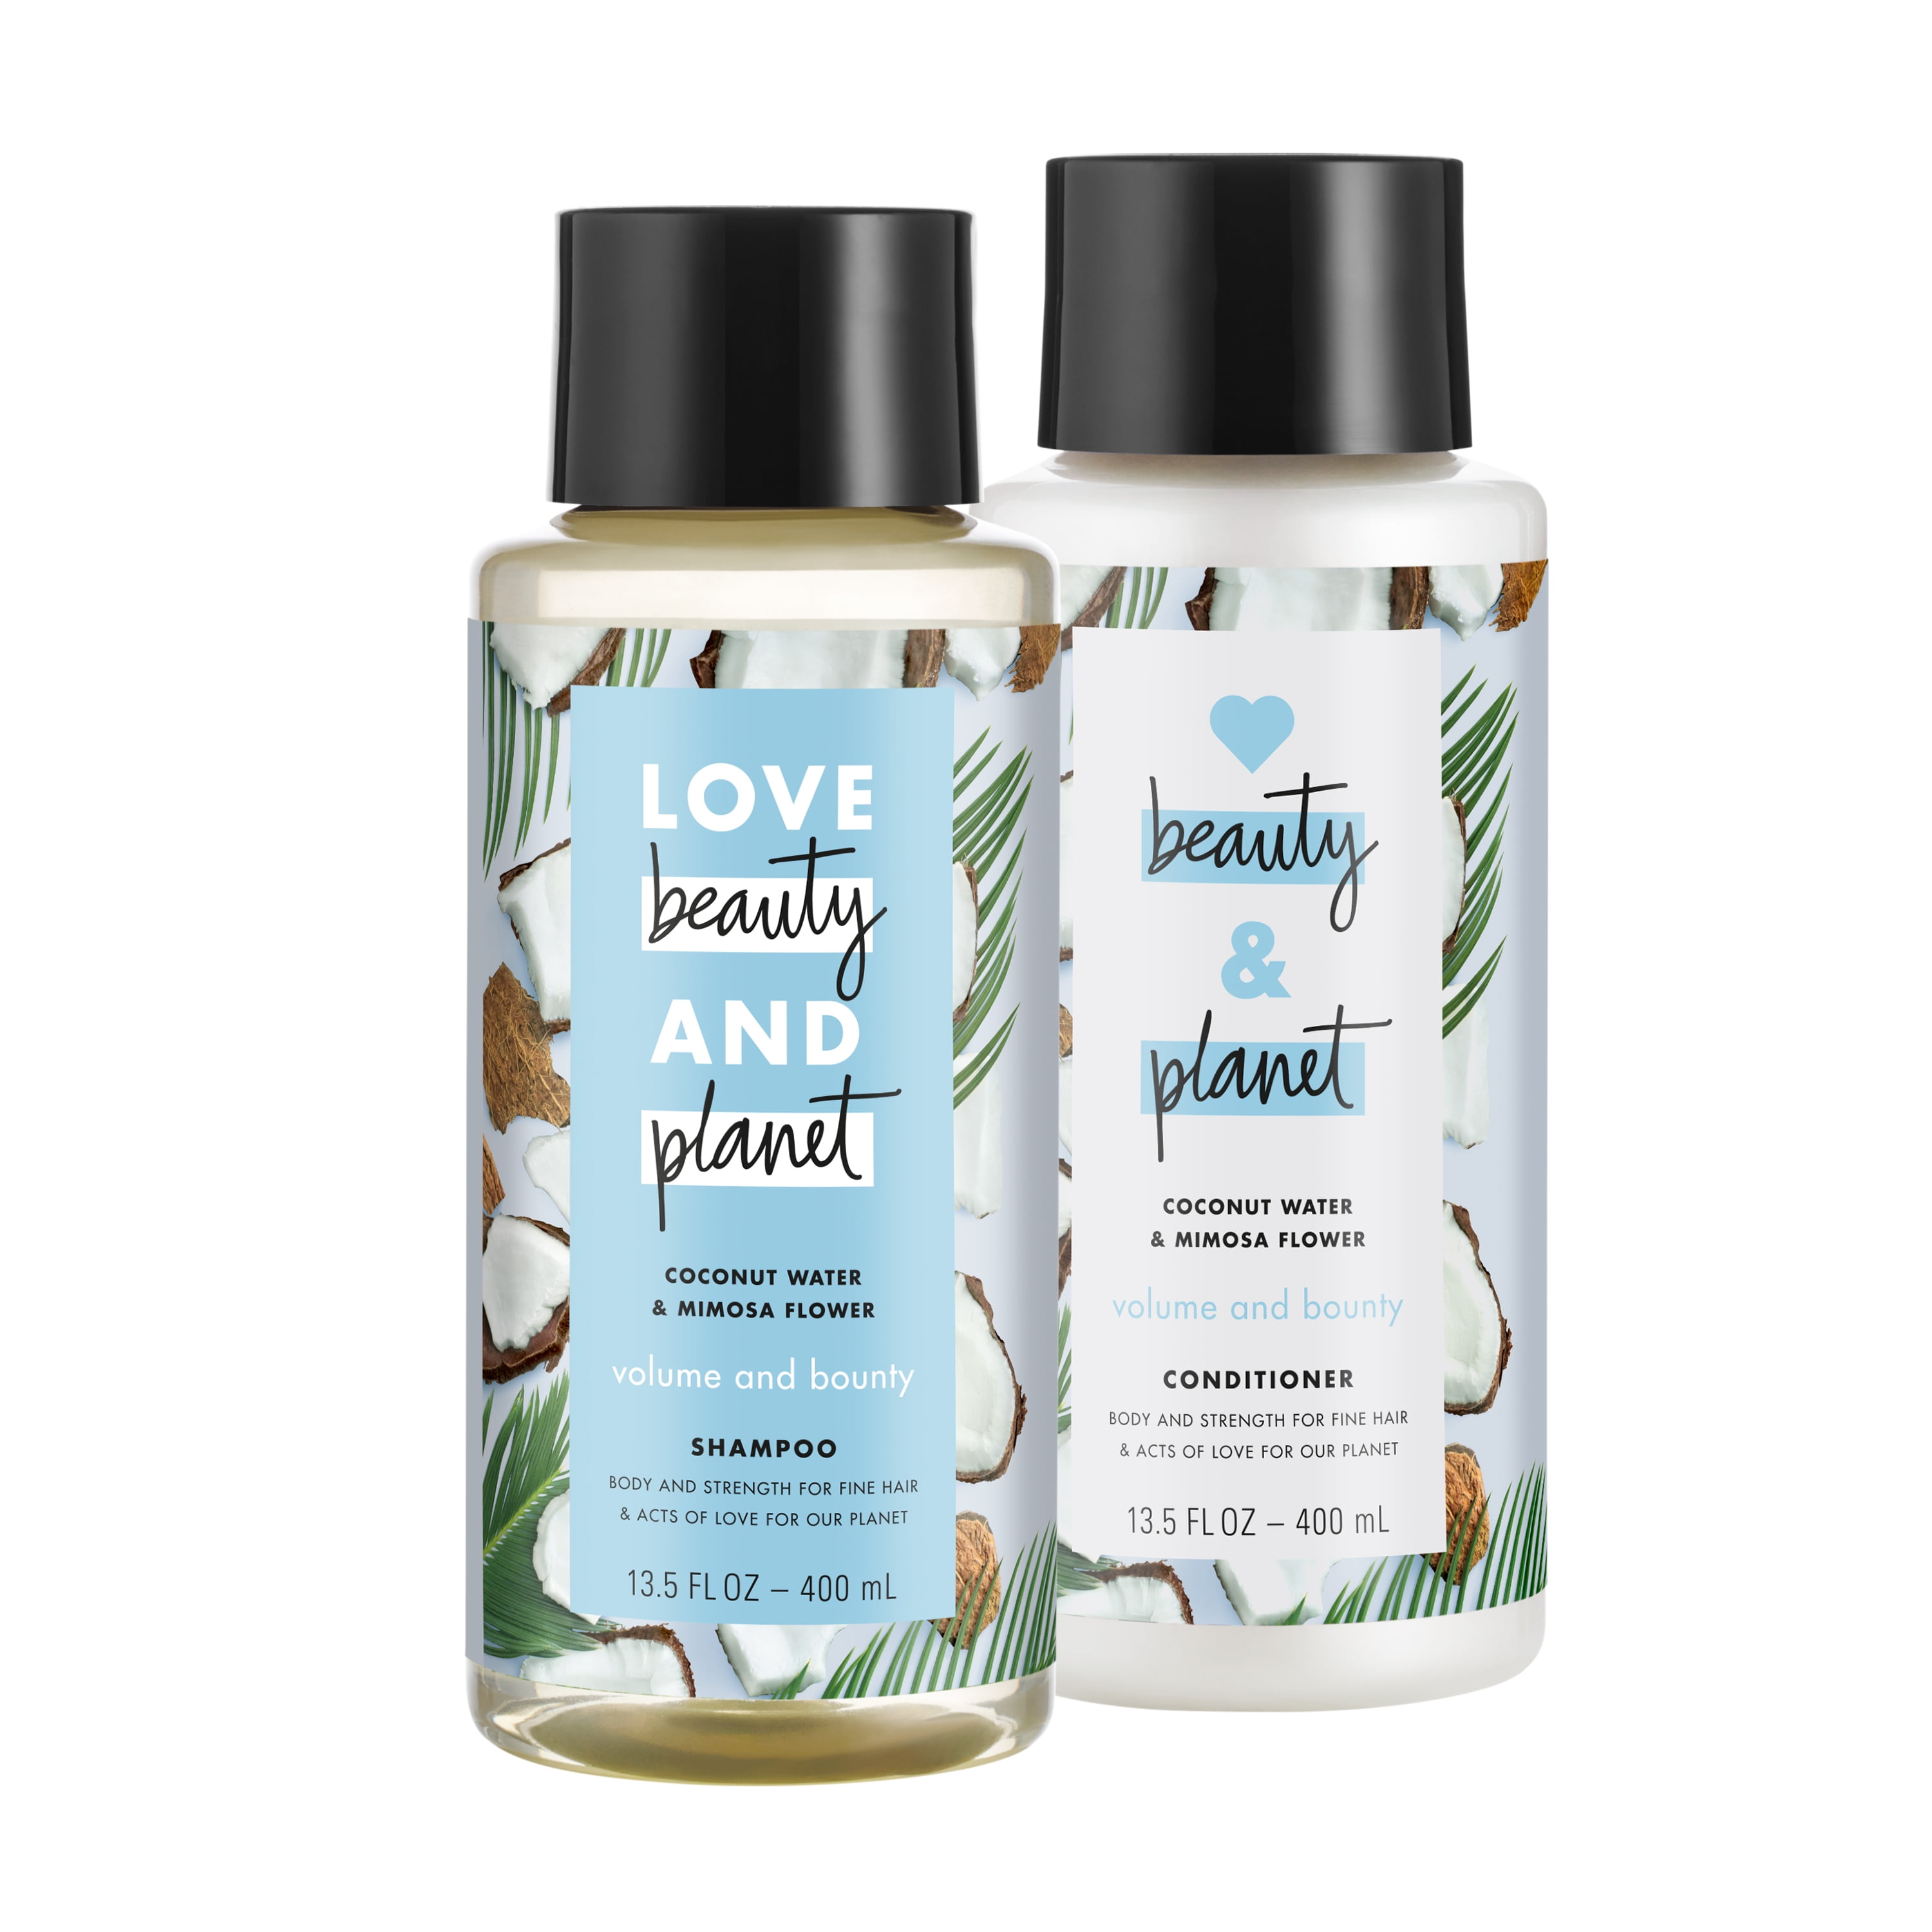 is love beauty and planet shampoo and conditioner good for your hair